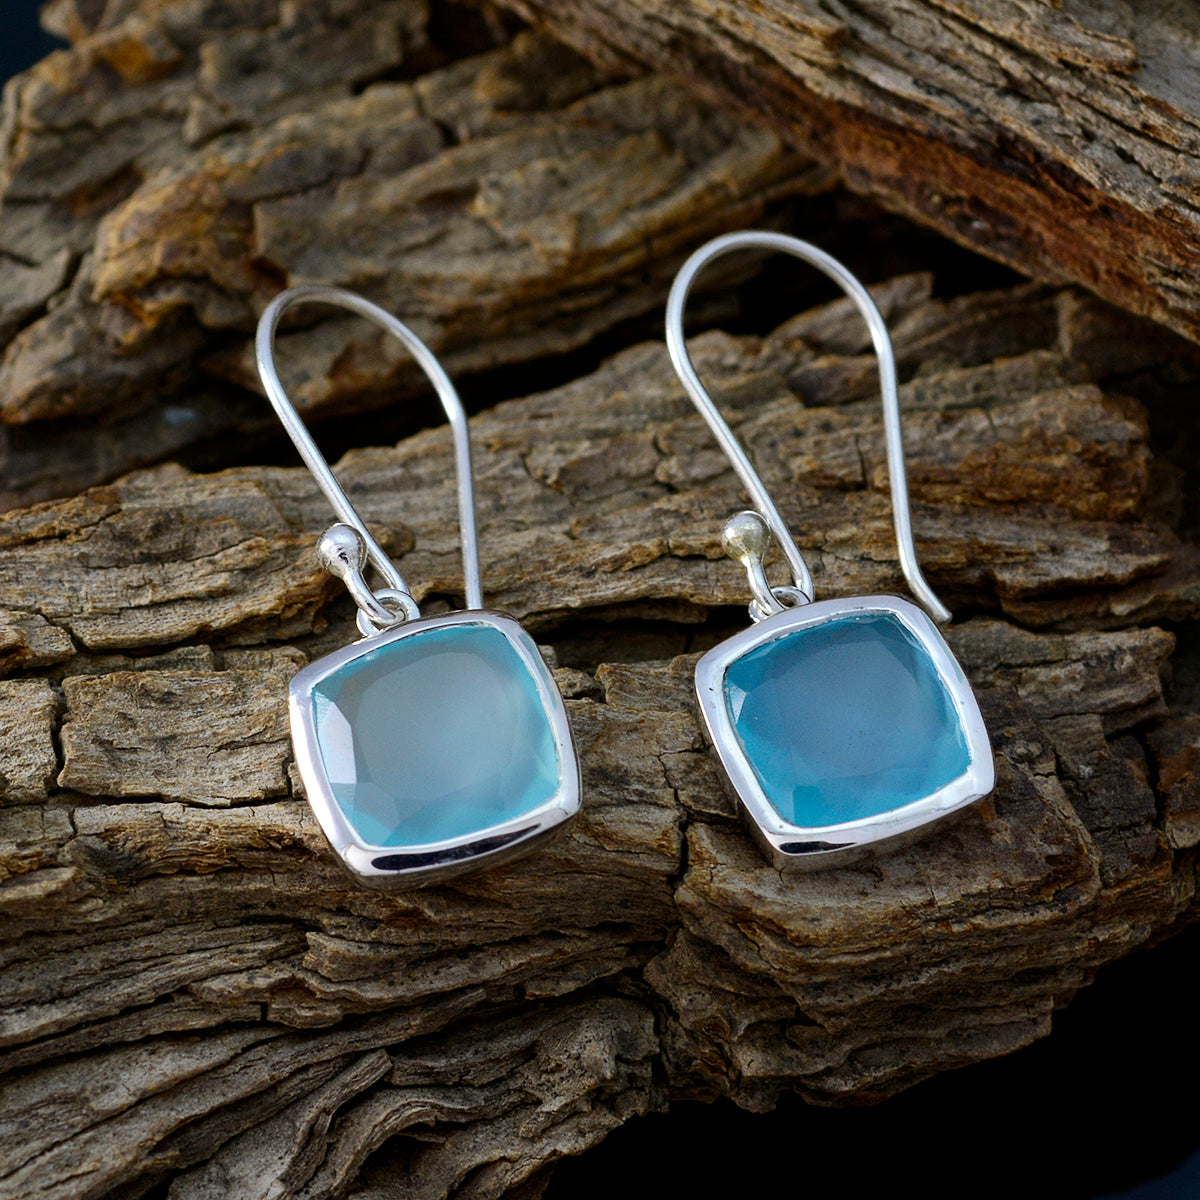 Riyo Nice Gemstone Octogon Faceted Aqua Chalcedoy Silver Earring gift for independence day